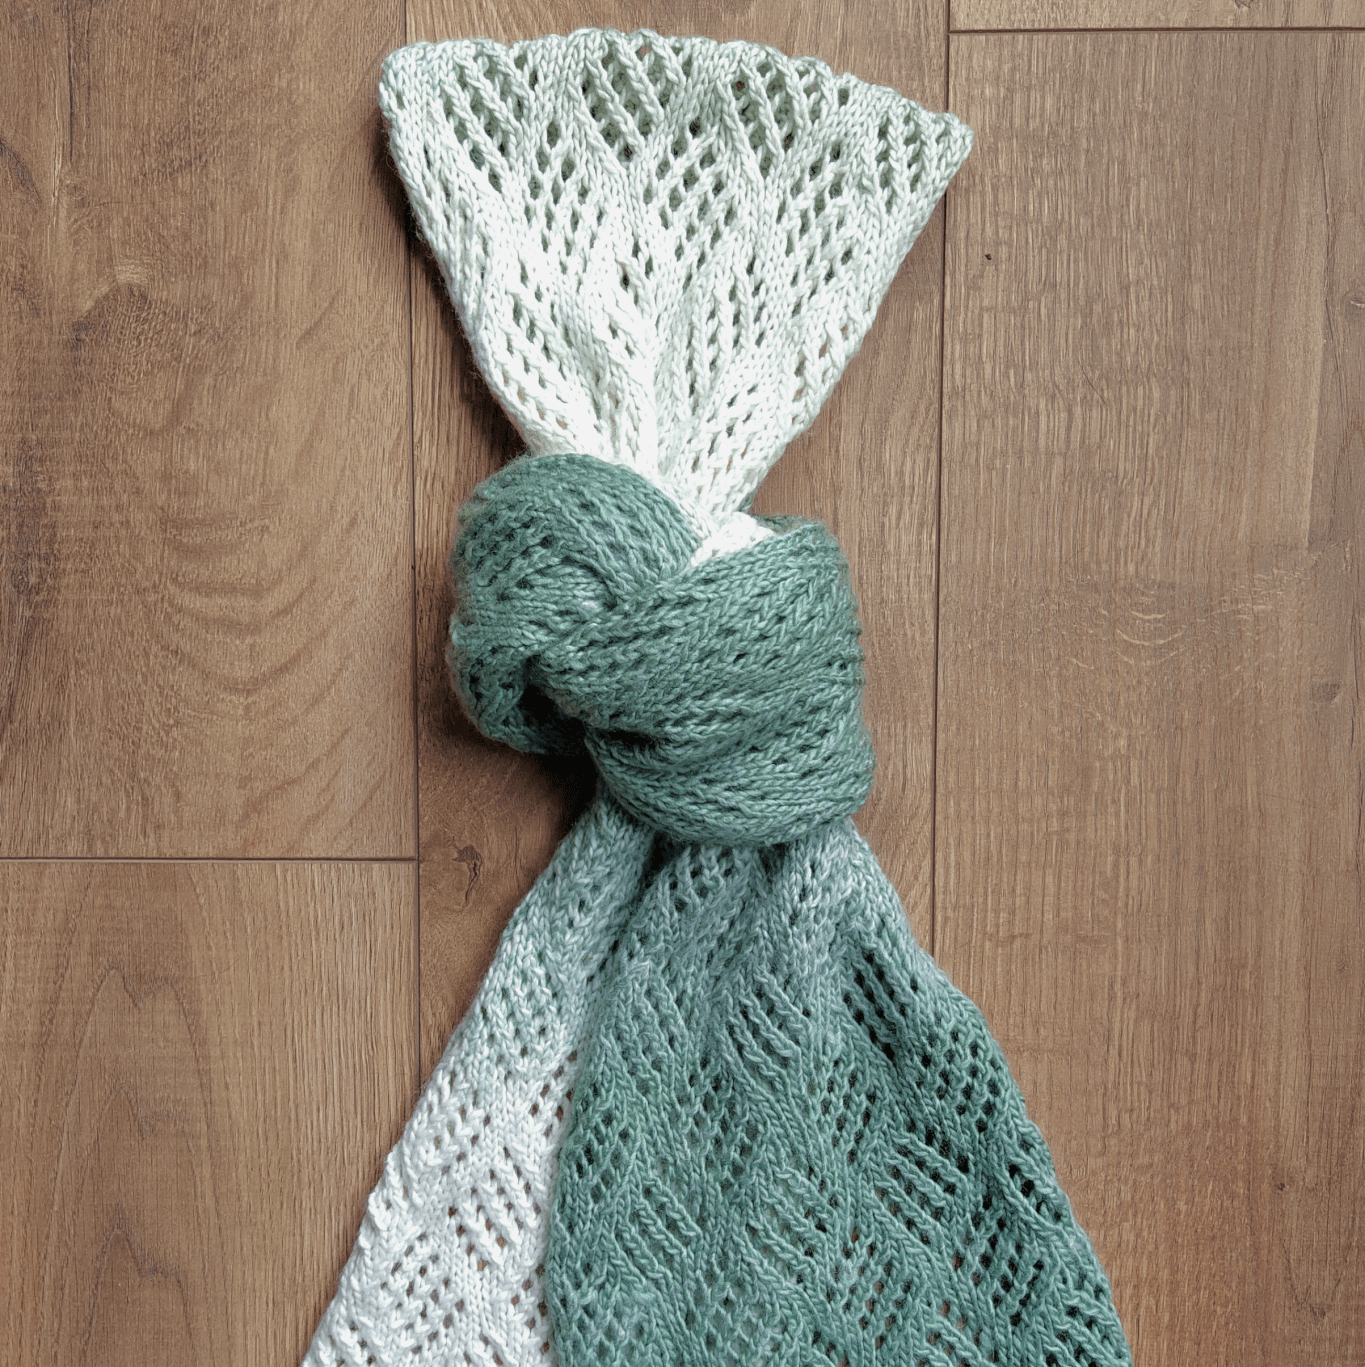 Checkerboard lace scarf by Purl Soho. Knit by Knitq.